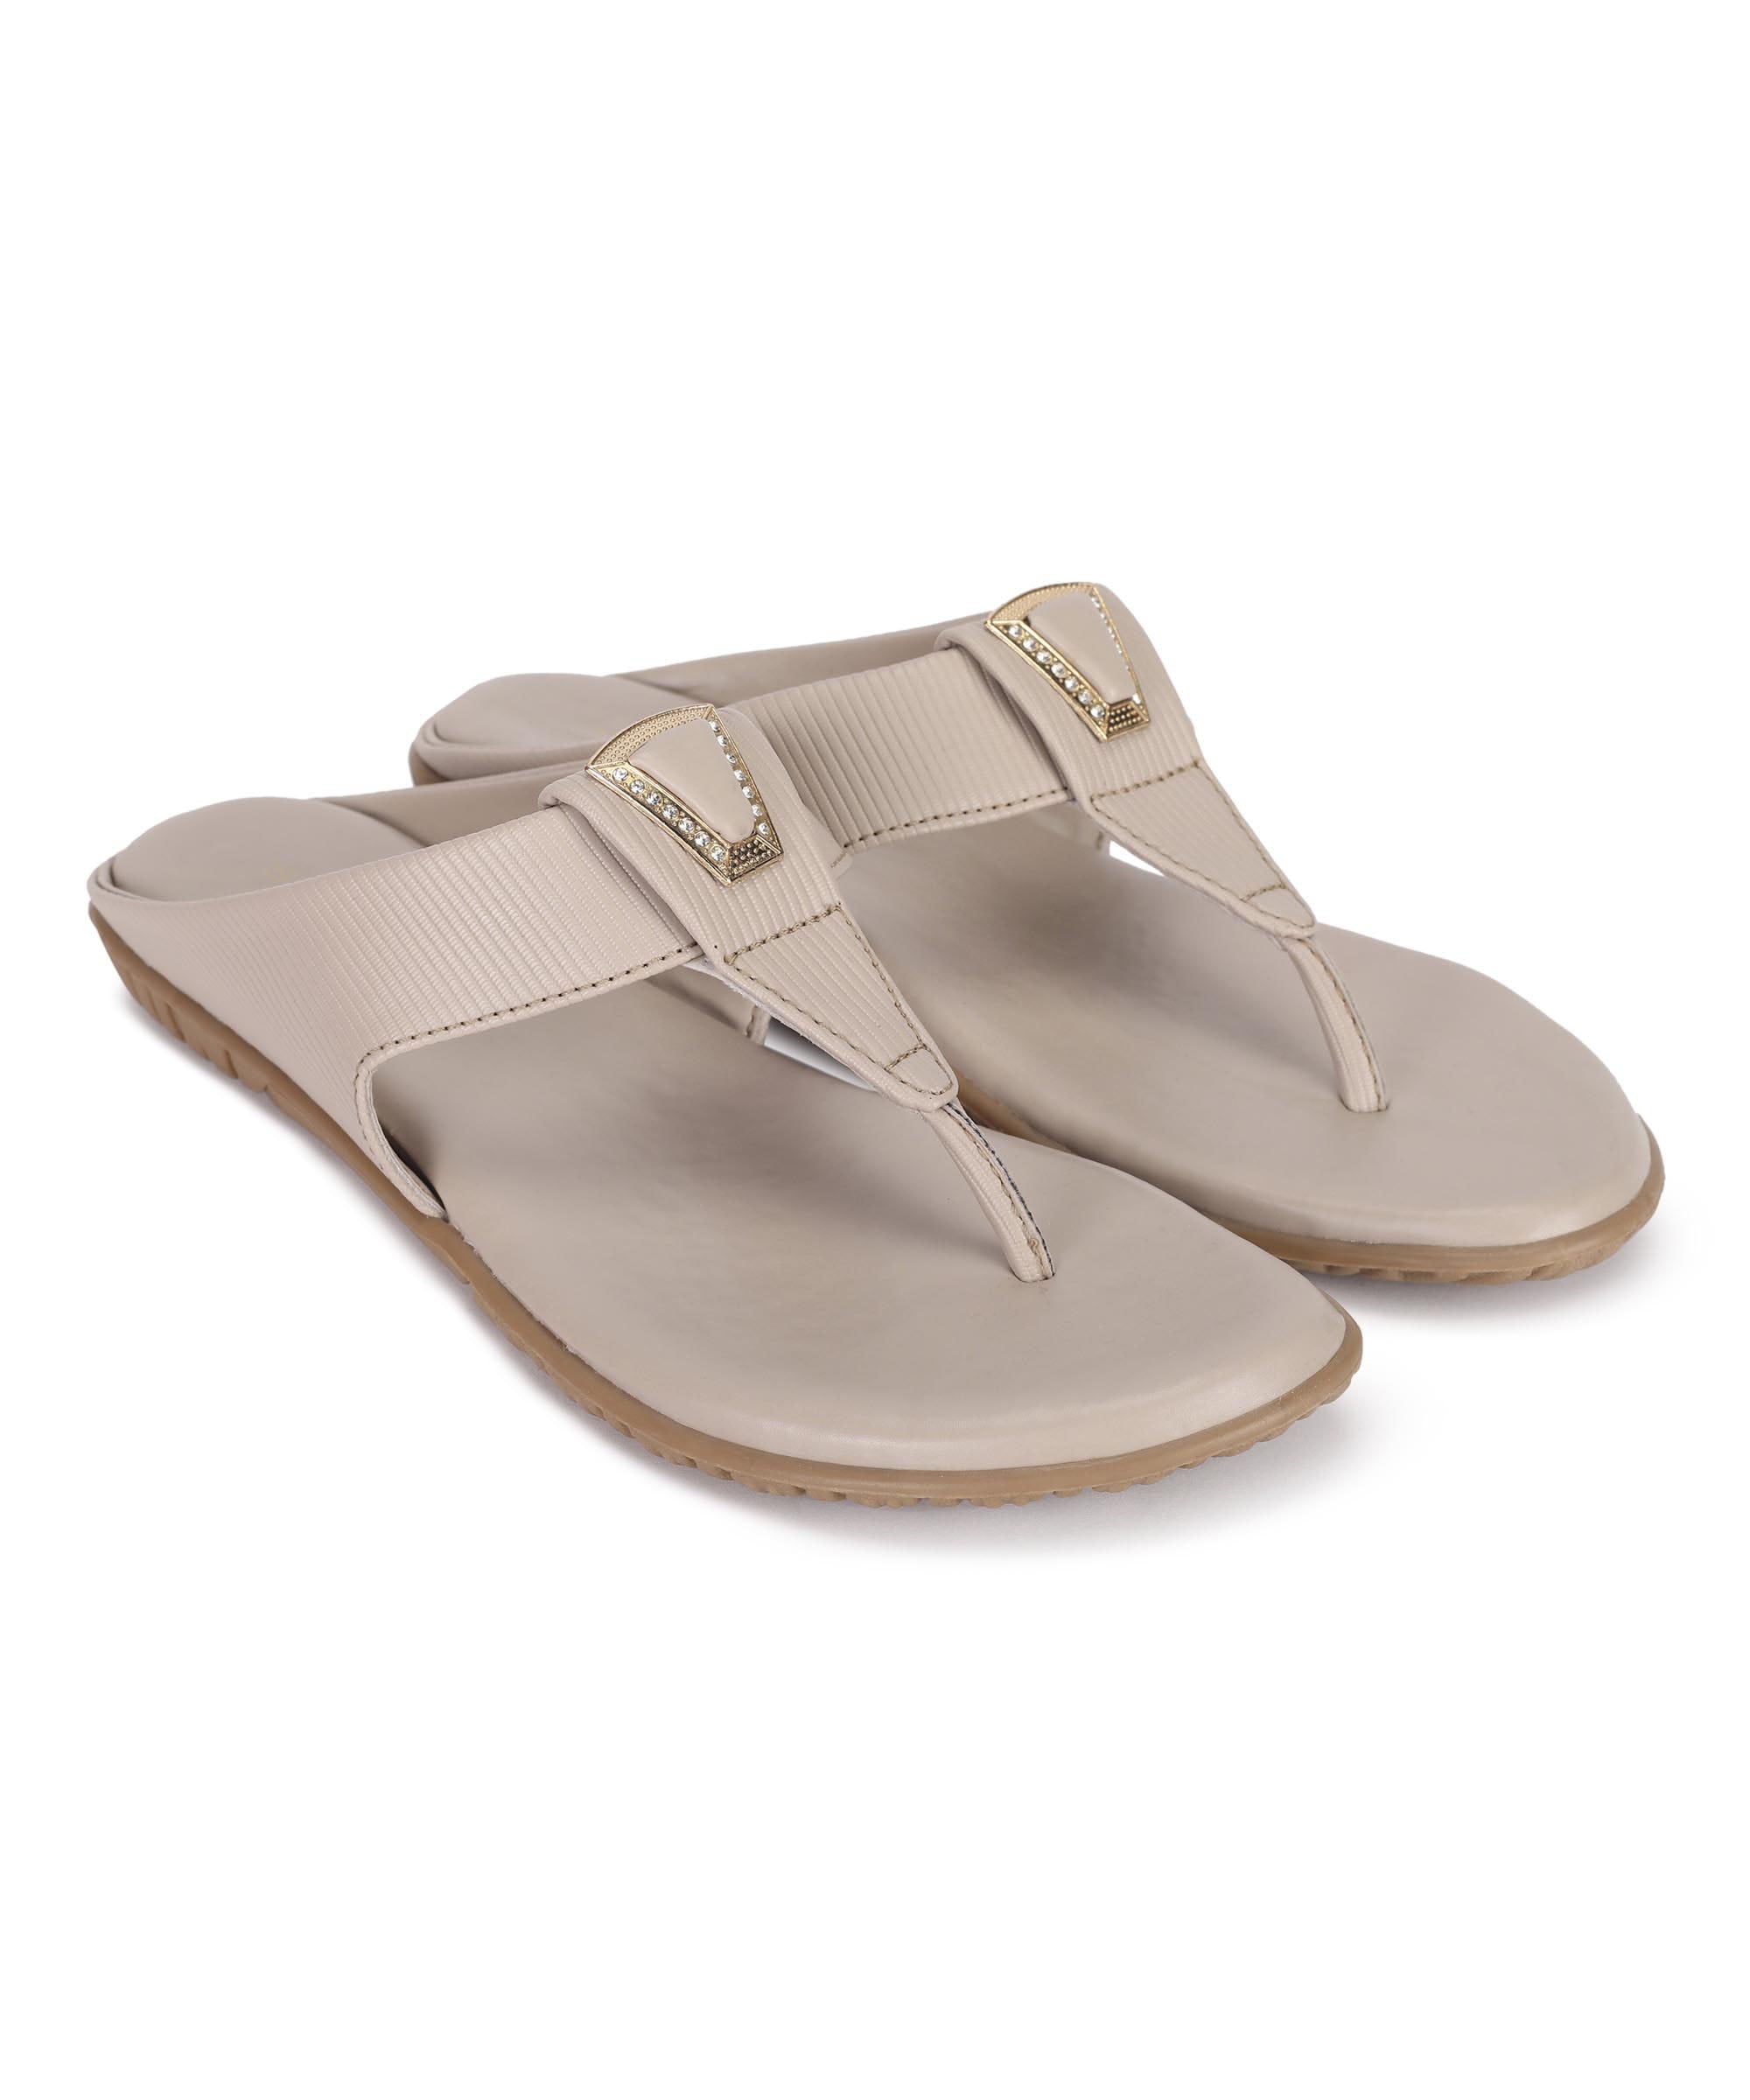 Paragon K6018L Women Sandals | Casual &amp; Formal Sandals | Stylish, Comfortable &amp; Durable | For Daily &amp; Occasion Wear